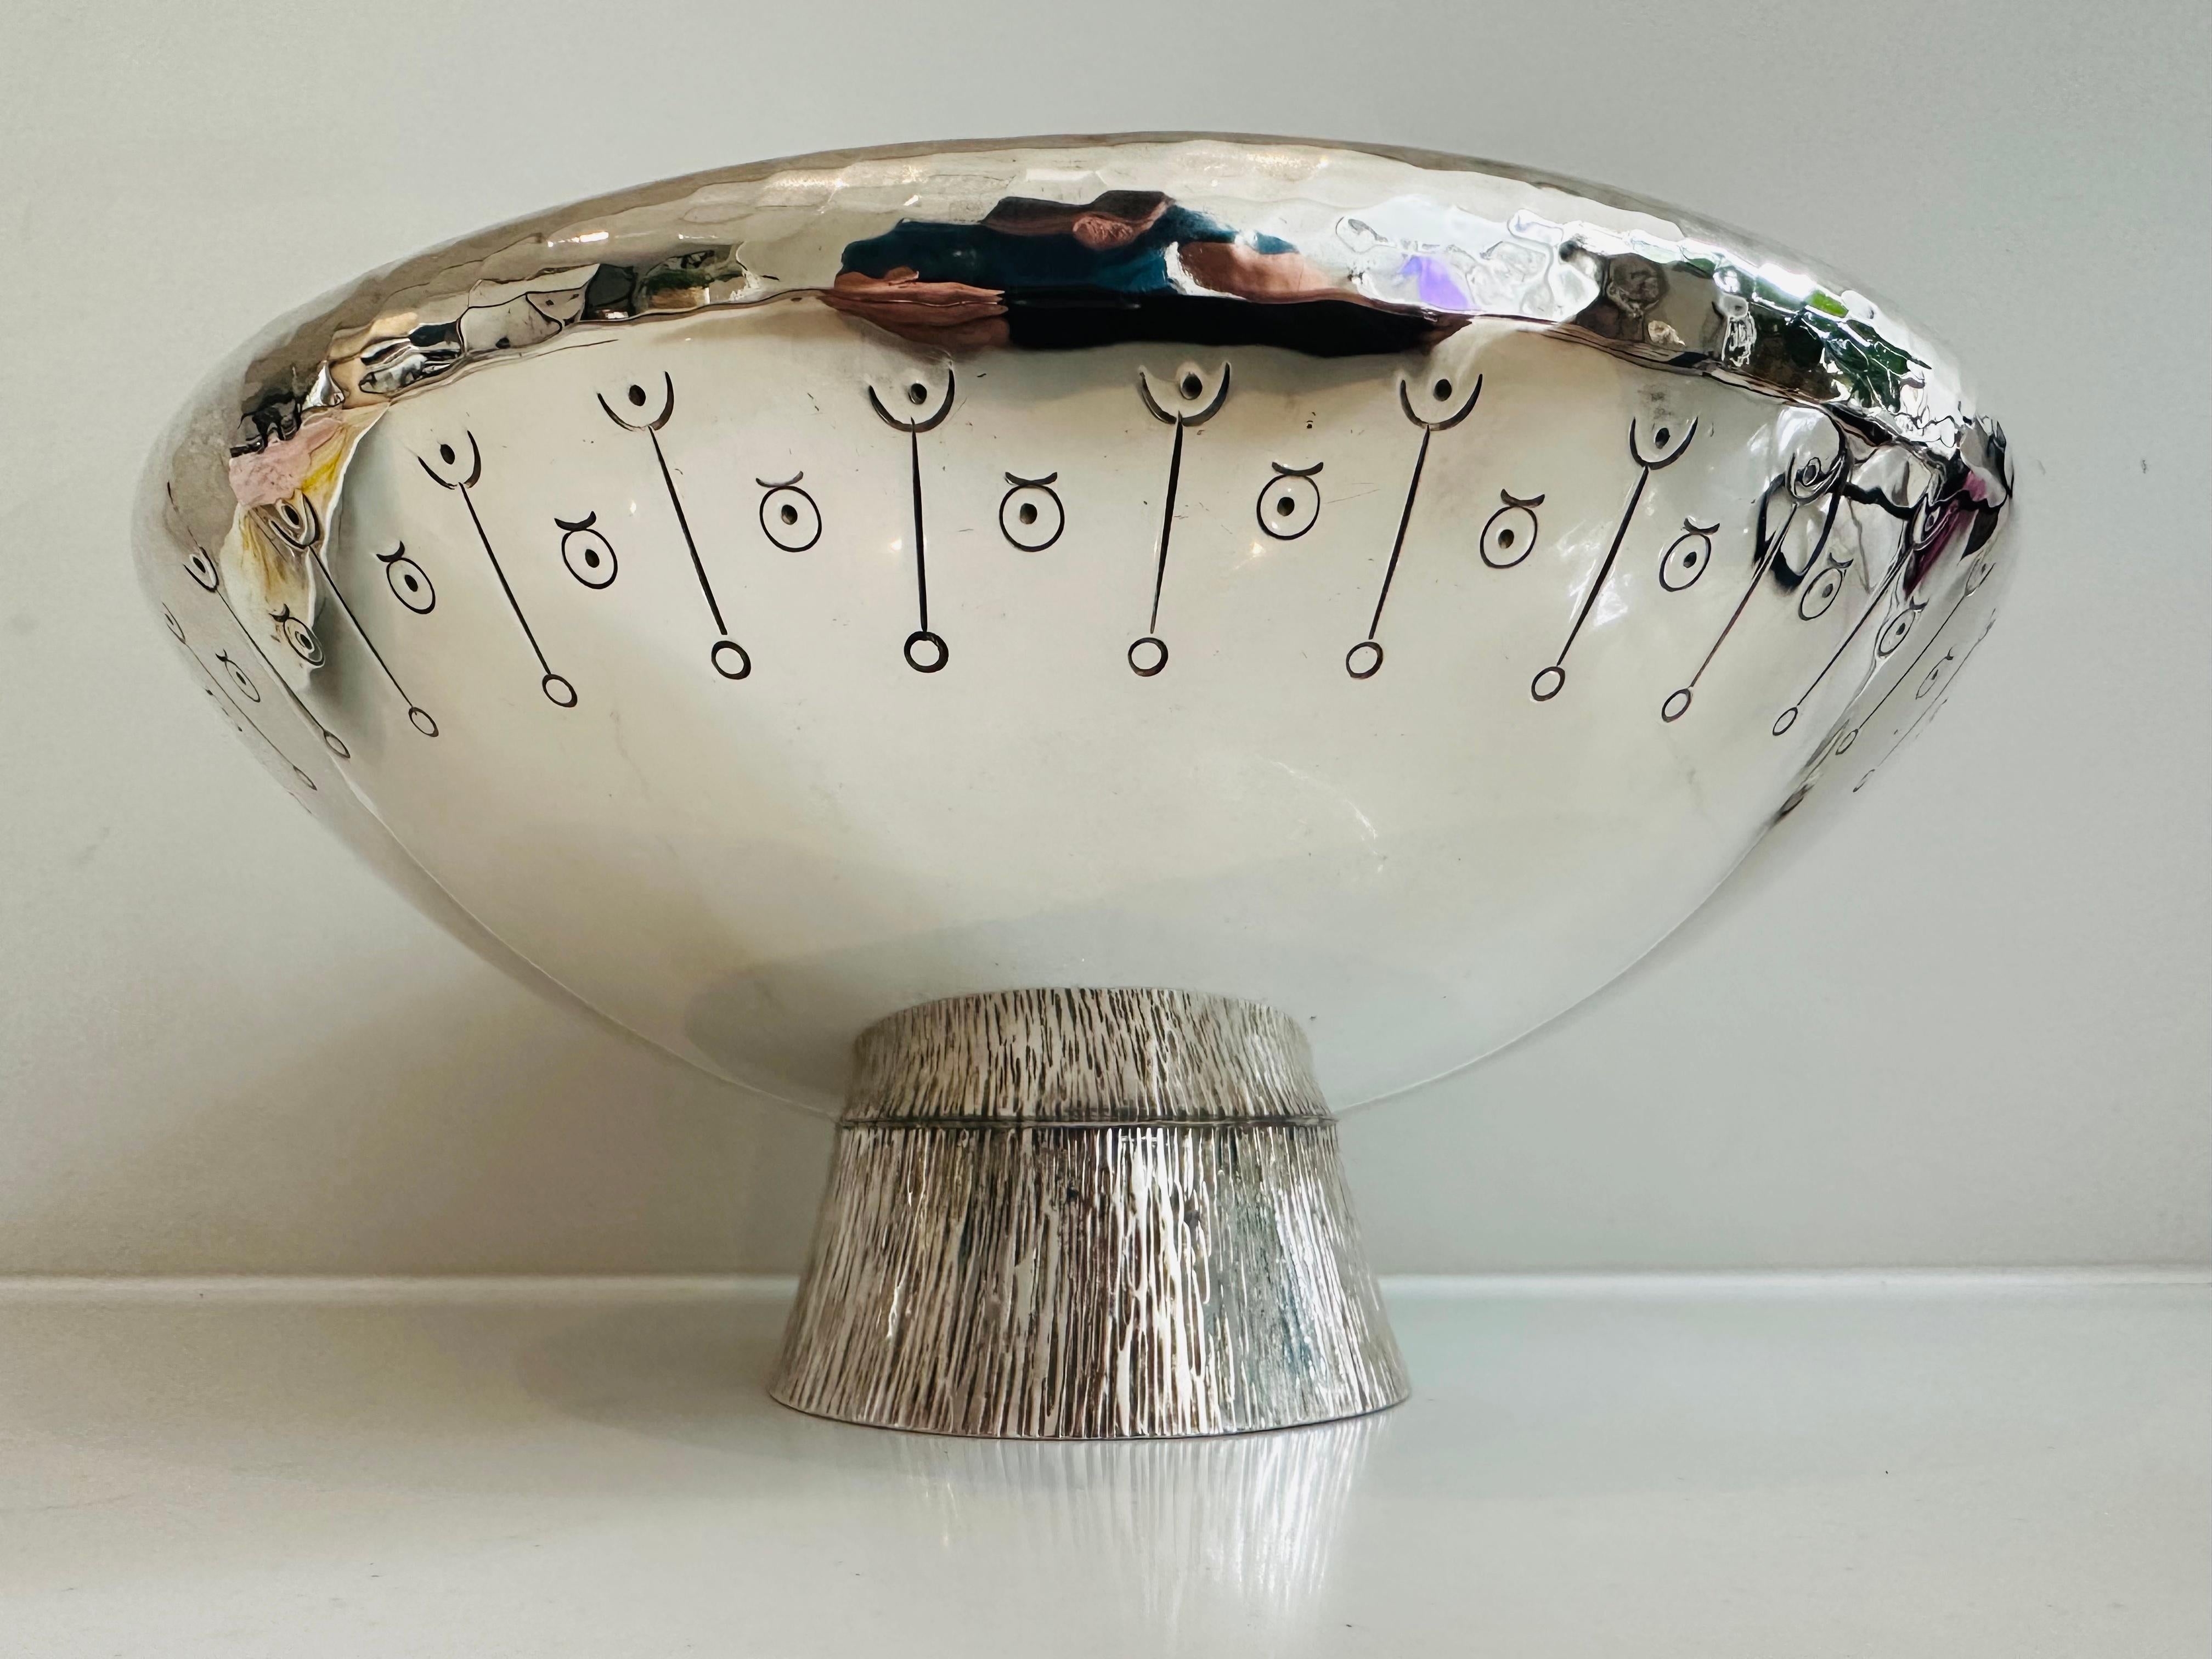 1980s English Silver Plated Decorative Hand-Hammered Serving or Display Bowl In Good Condition For Sale In London, GB